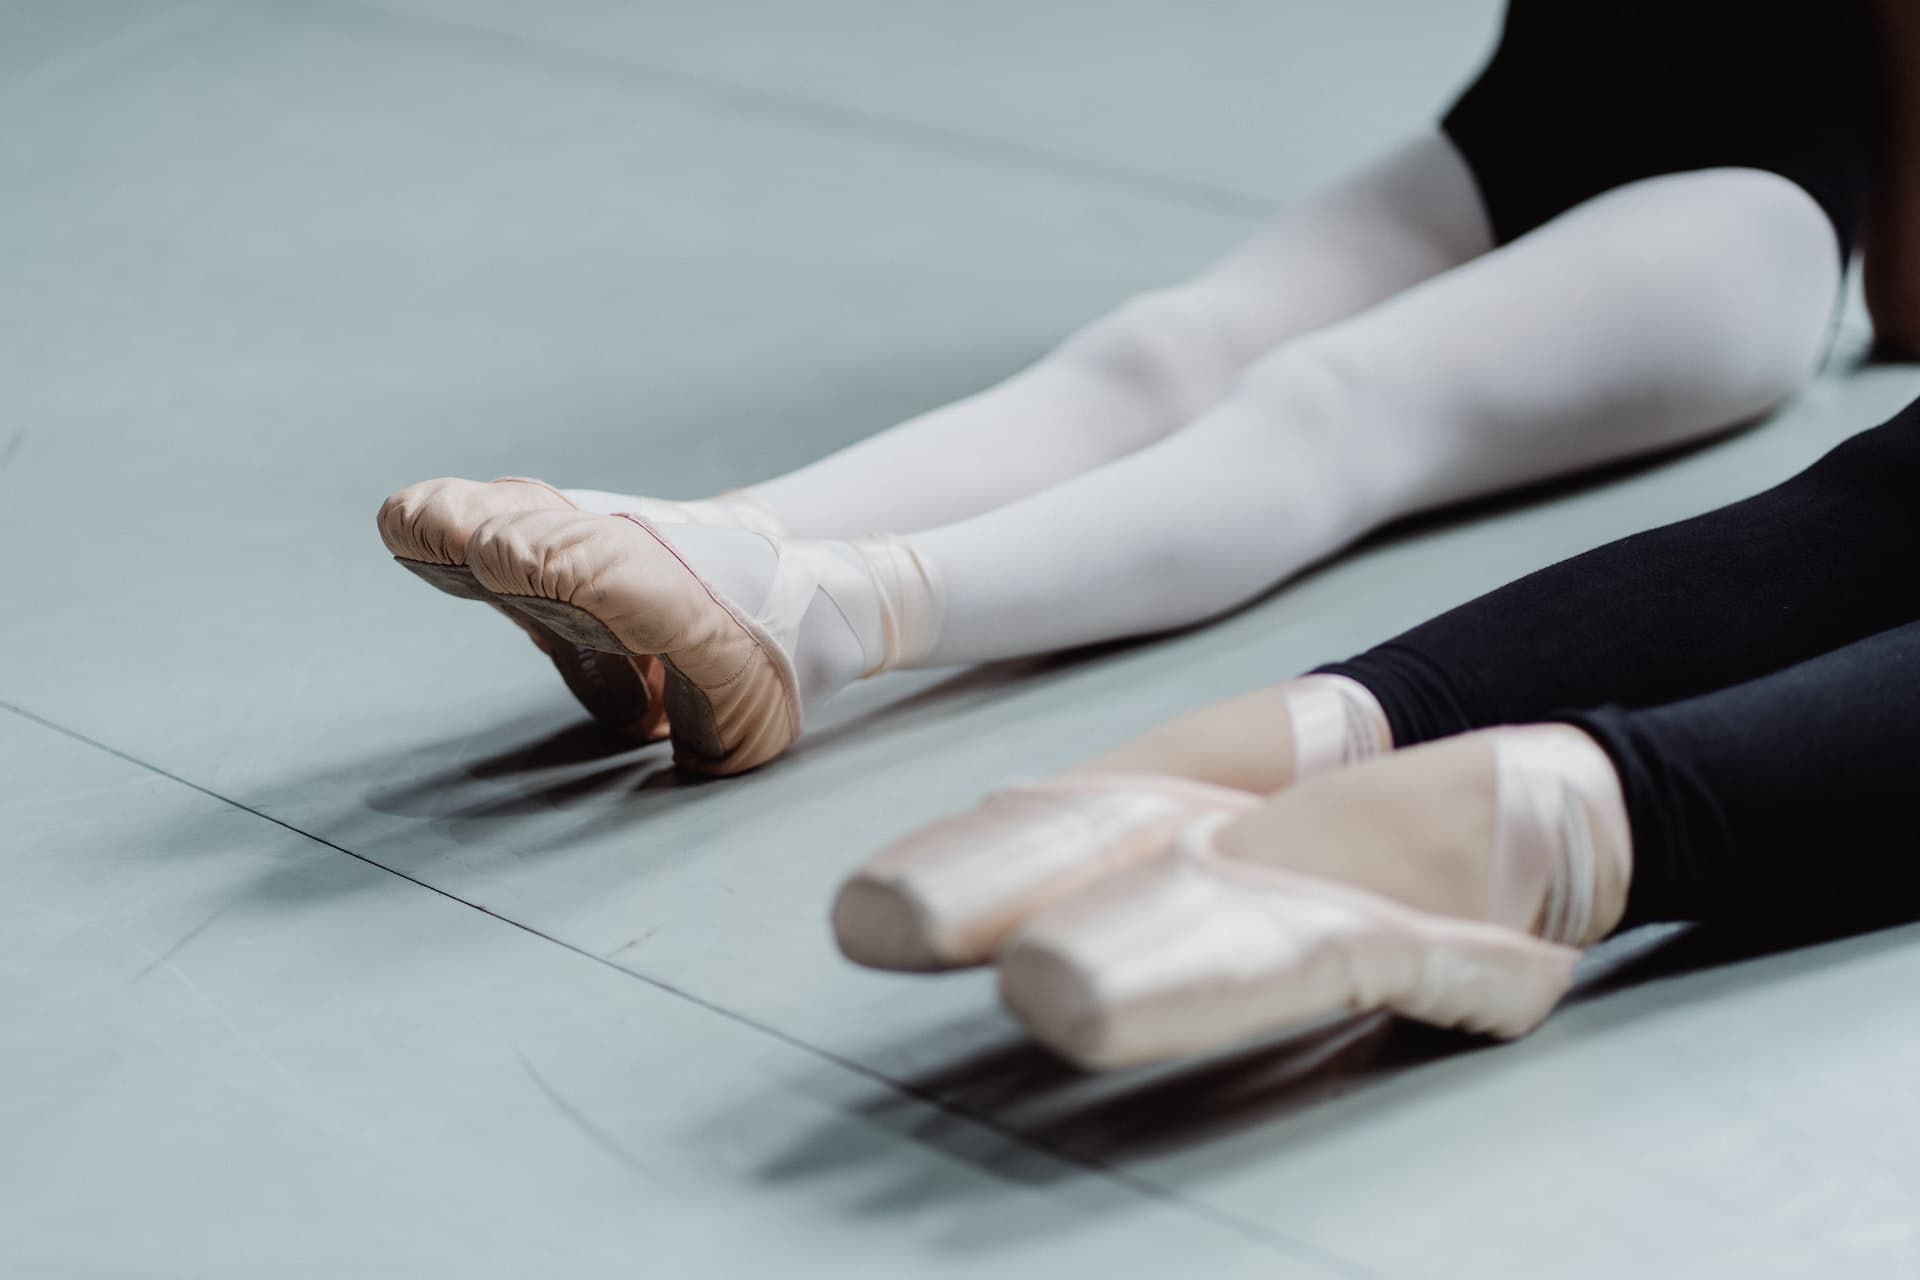 the legs of two girl ballet dancers in peach colored ballet shoes, one girls is wearing black leggings and the other has white tights